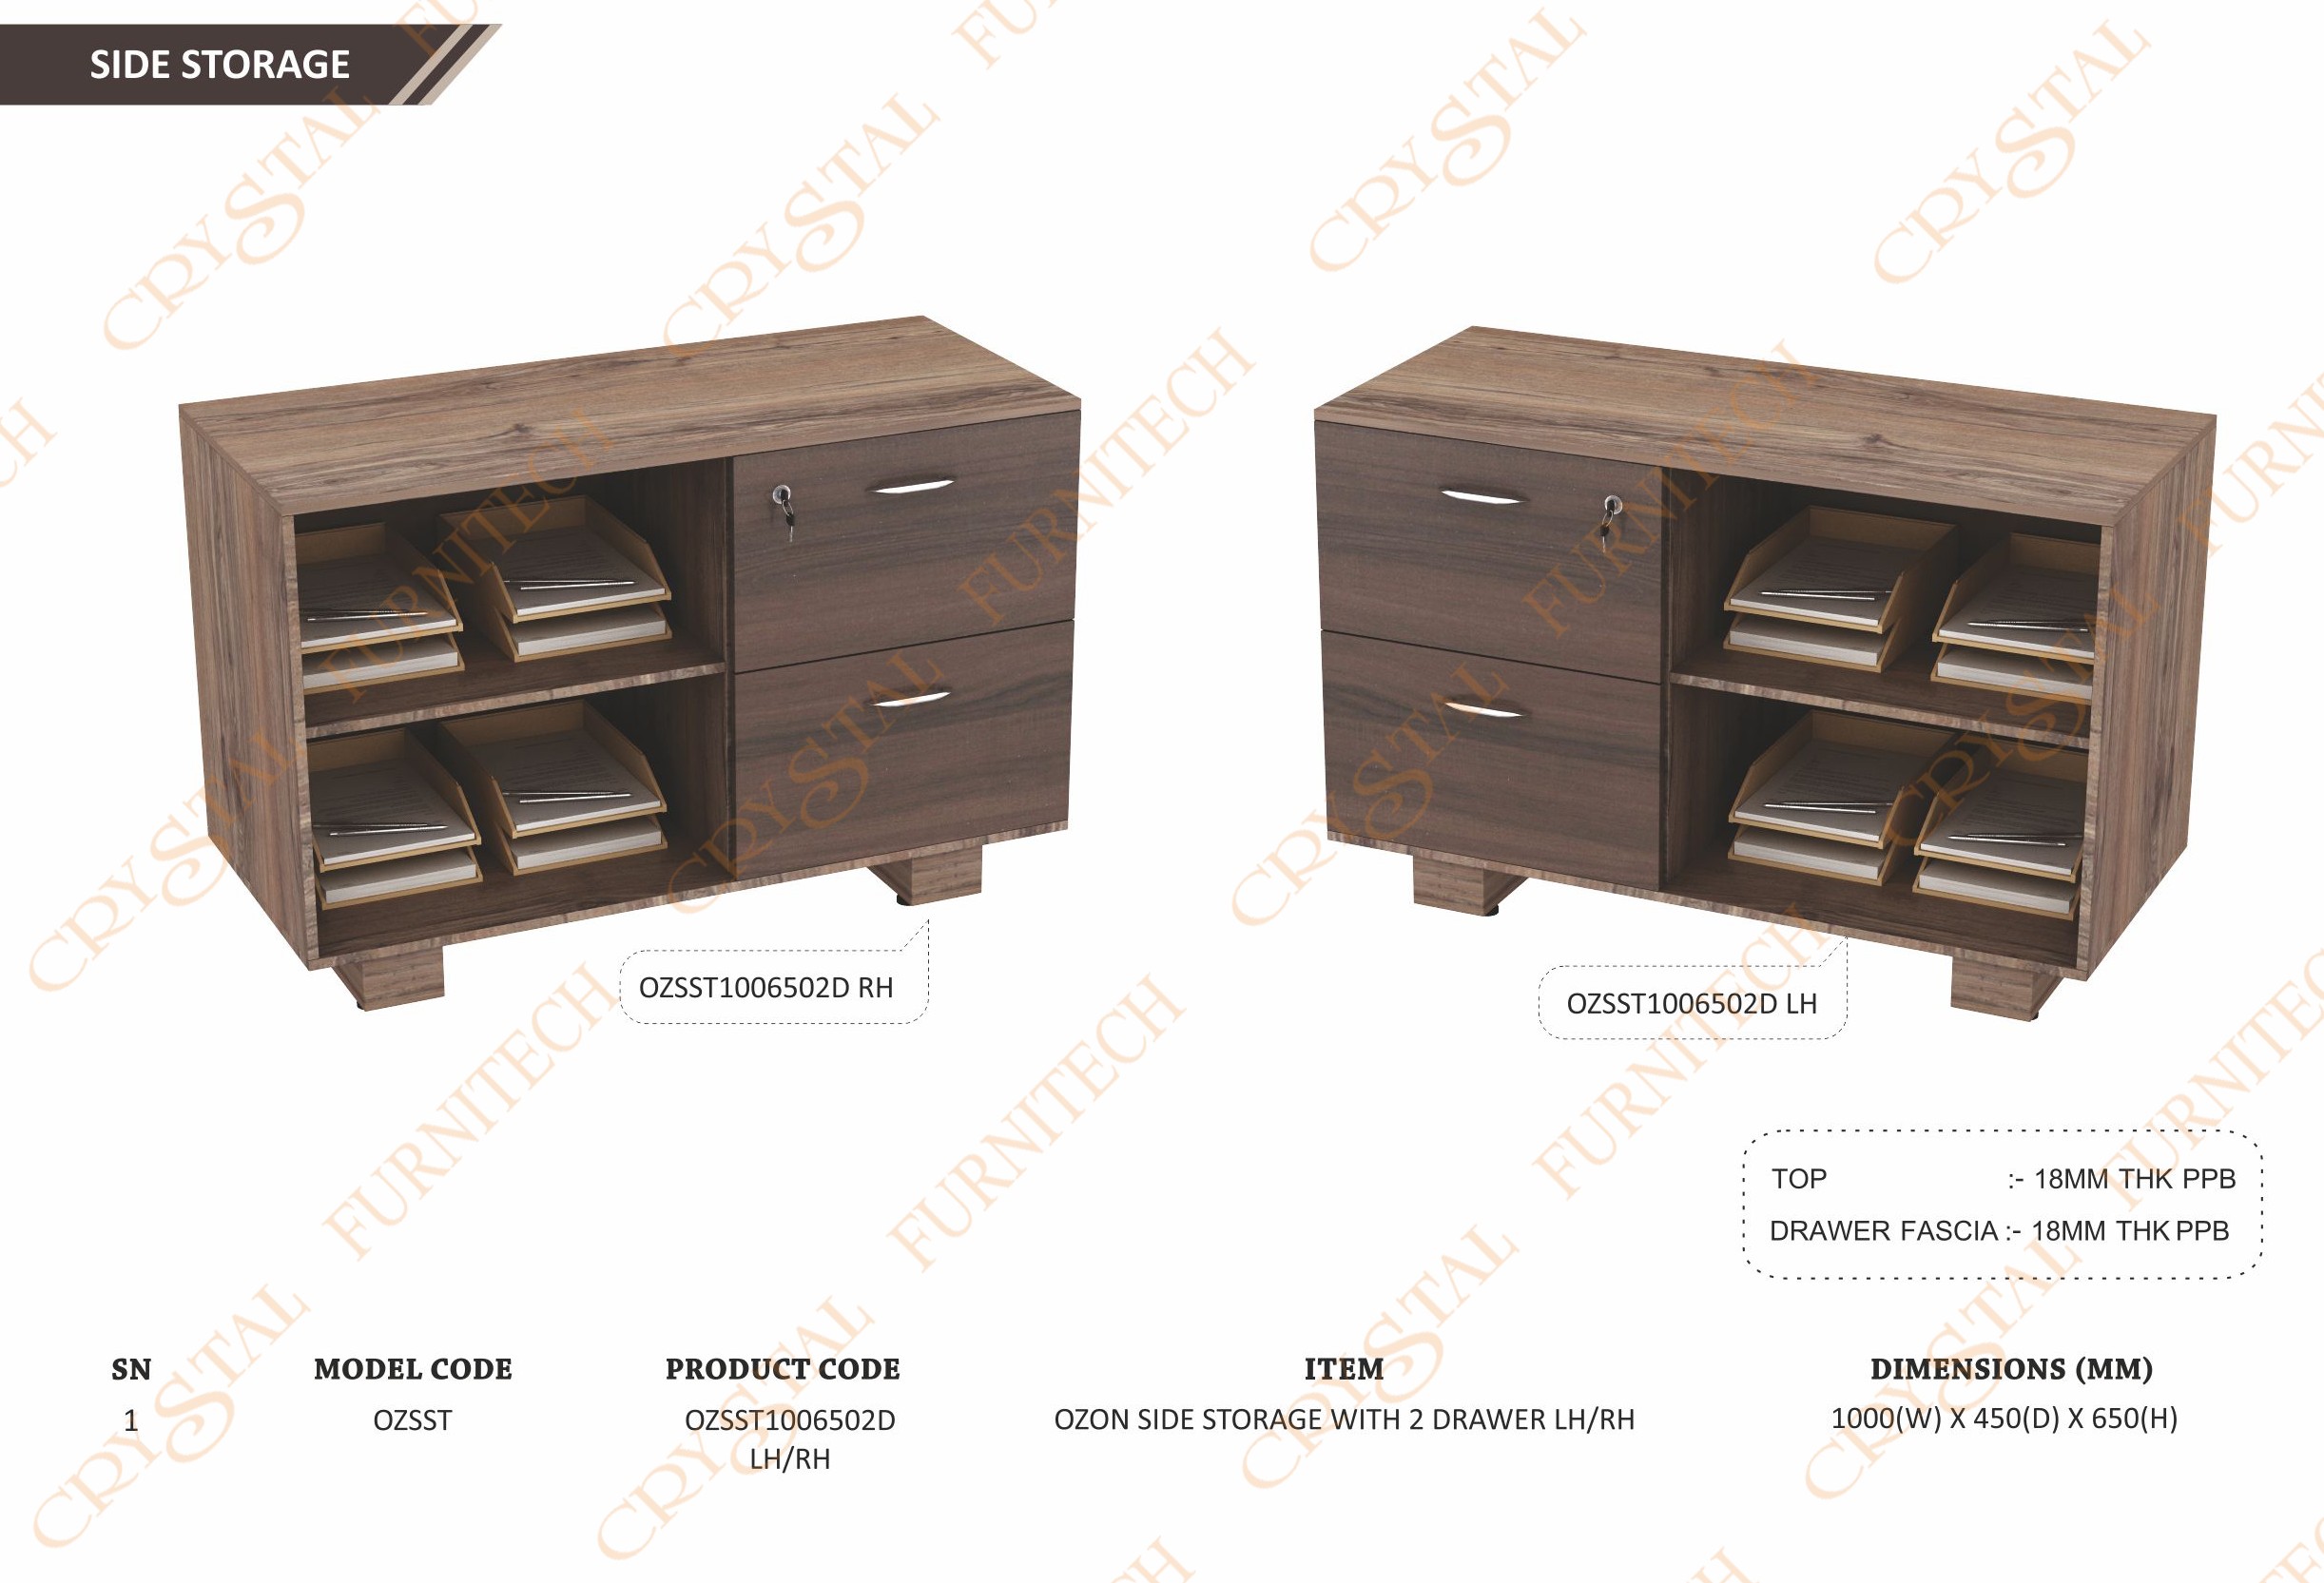 images/products/Office-Furniture-SIDE-STORAGE_1657179795.jpg